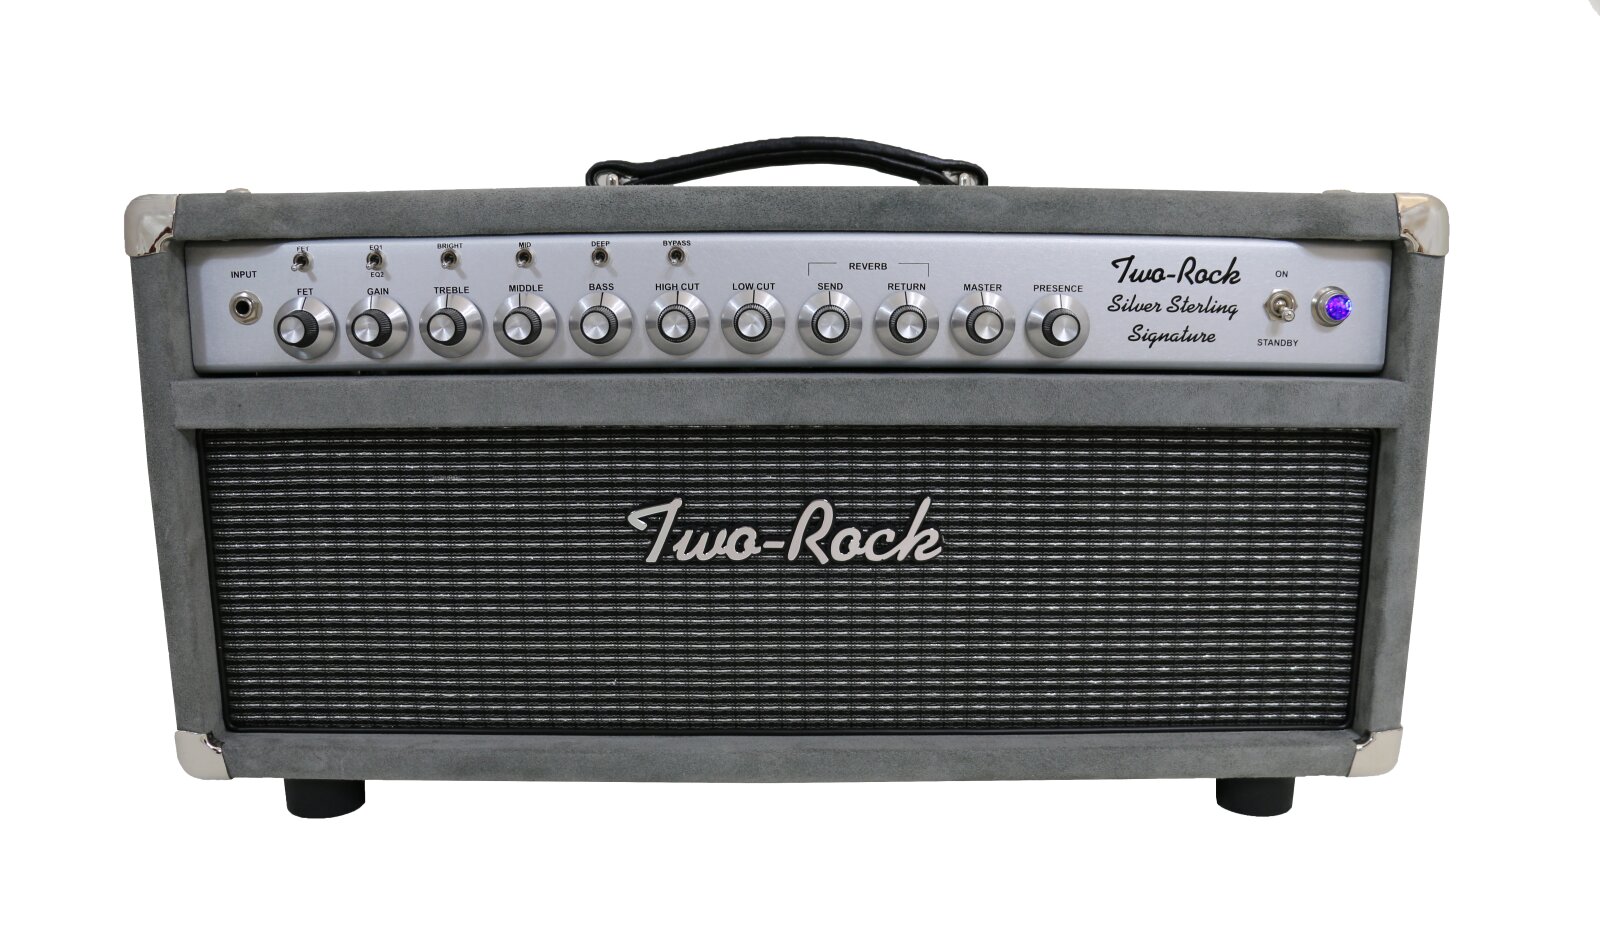 Two-Rock Silver Sterling Signature 100 Watt Head, Silver Anodize, Grill and Knobs, Gray Suede finish : photo 1